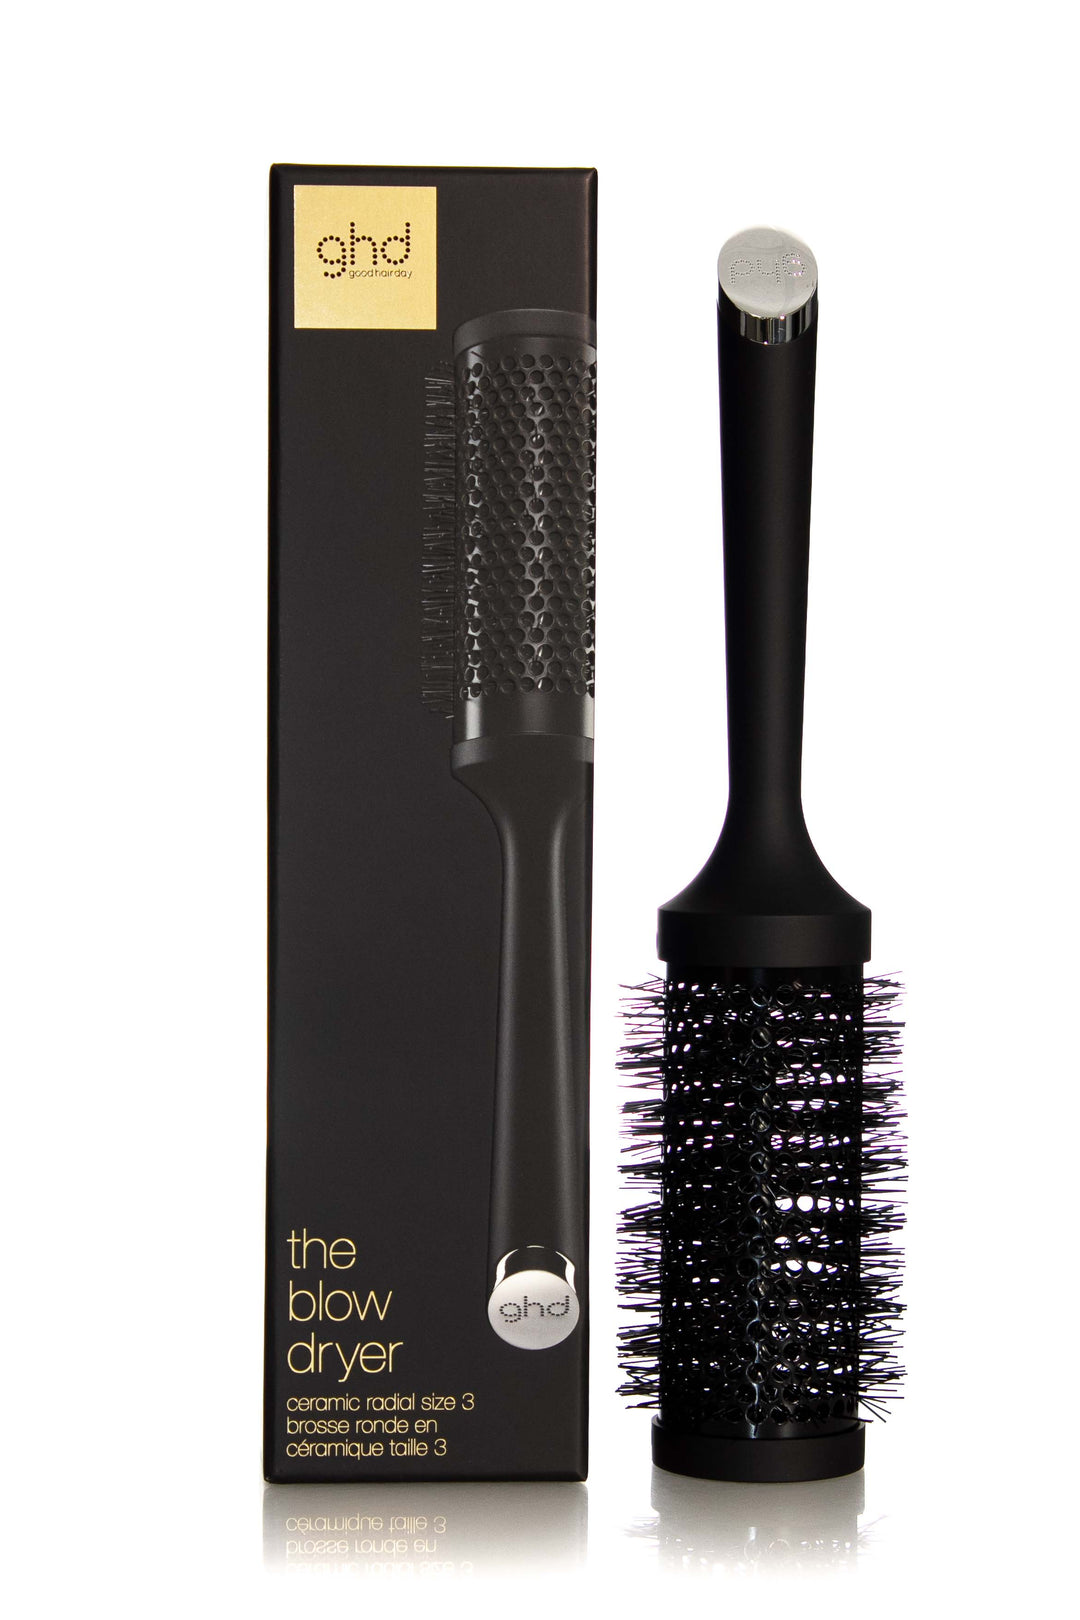 GHD THE BLOW DRYER CERAMIC RADIAL BRUSH SIZE 3